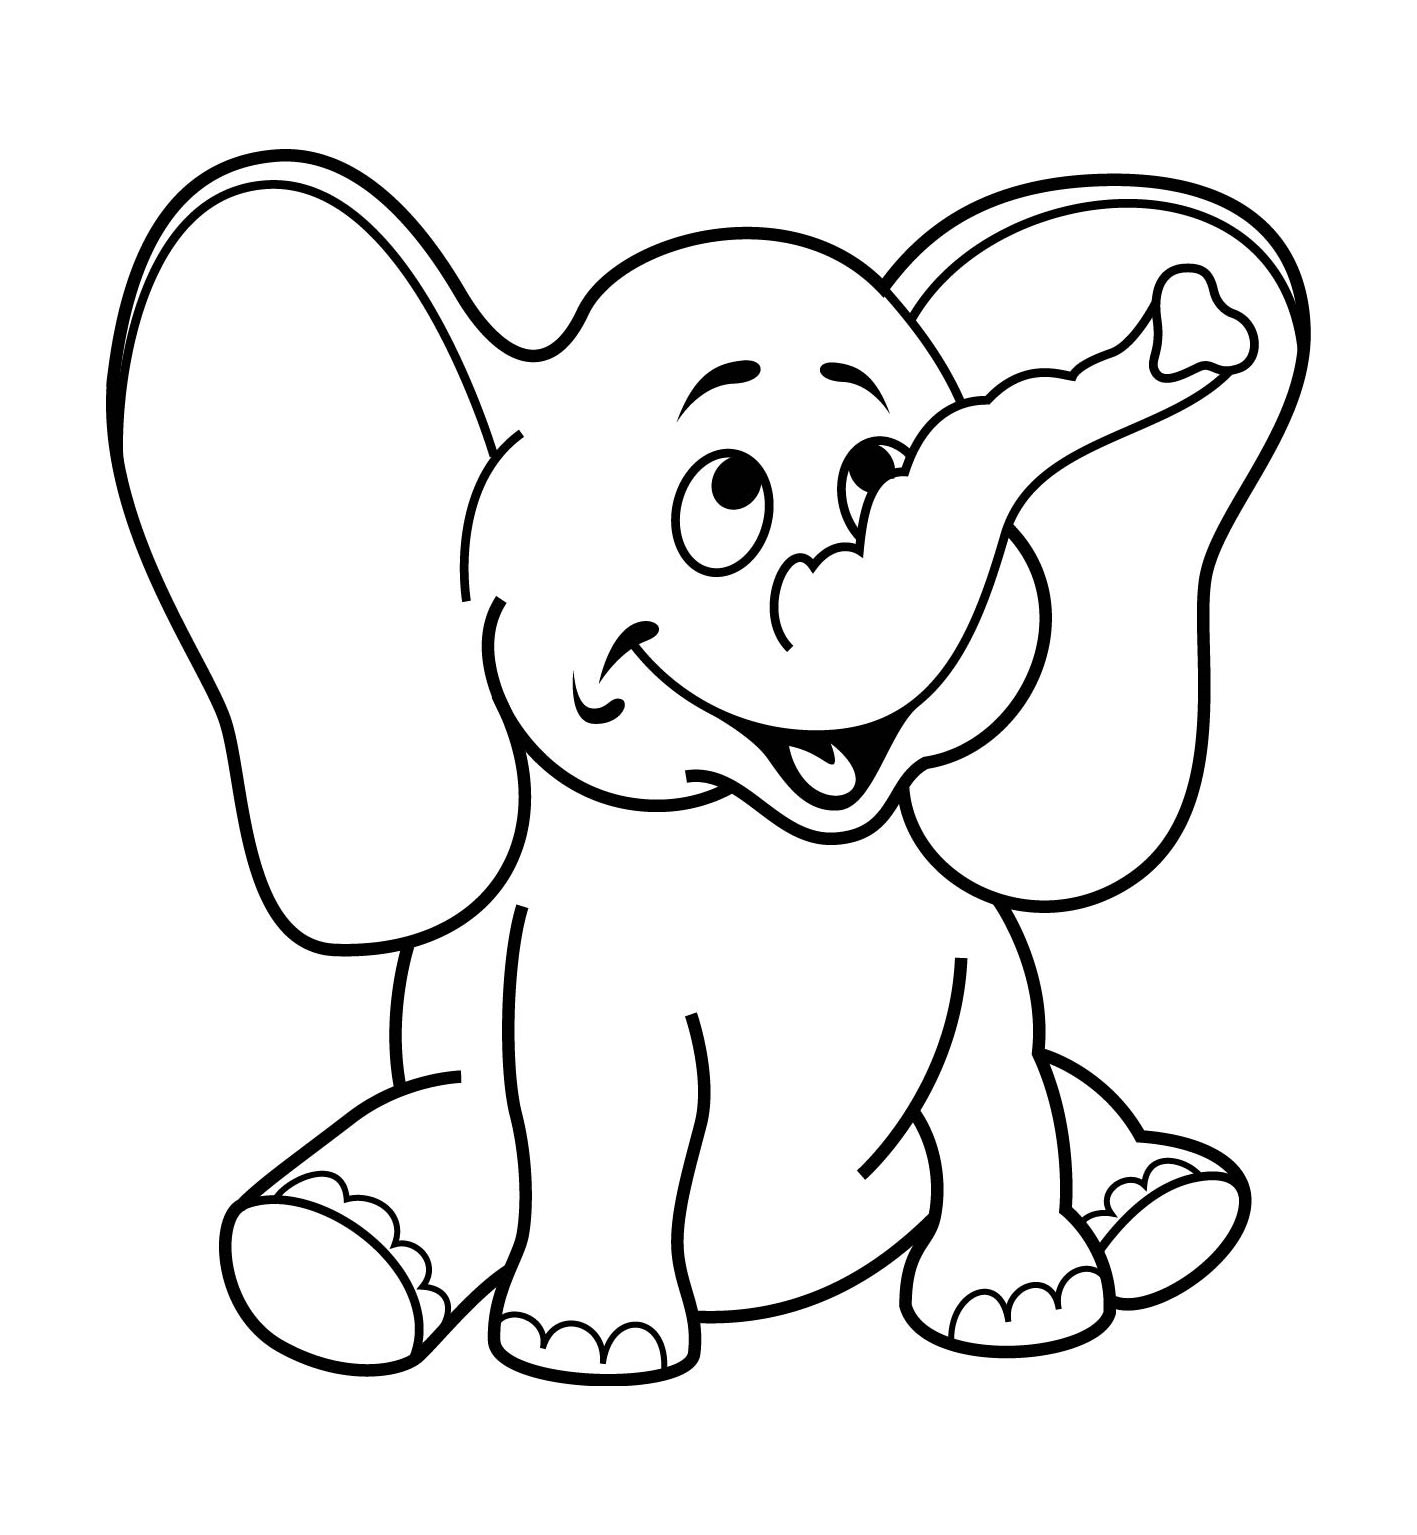 Coloring pages for 34 year old girls 34 years nursery